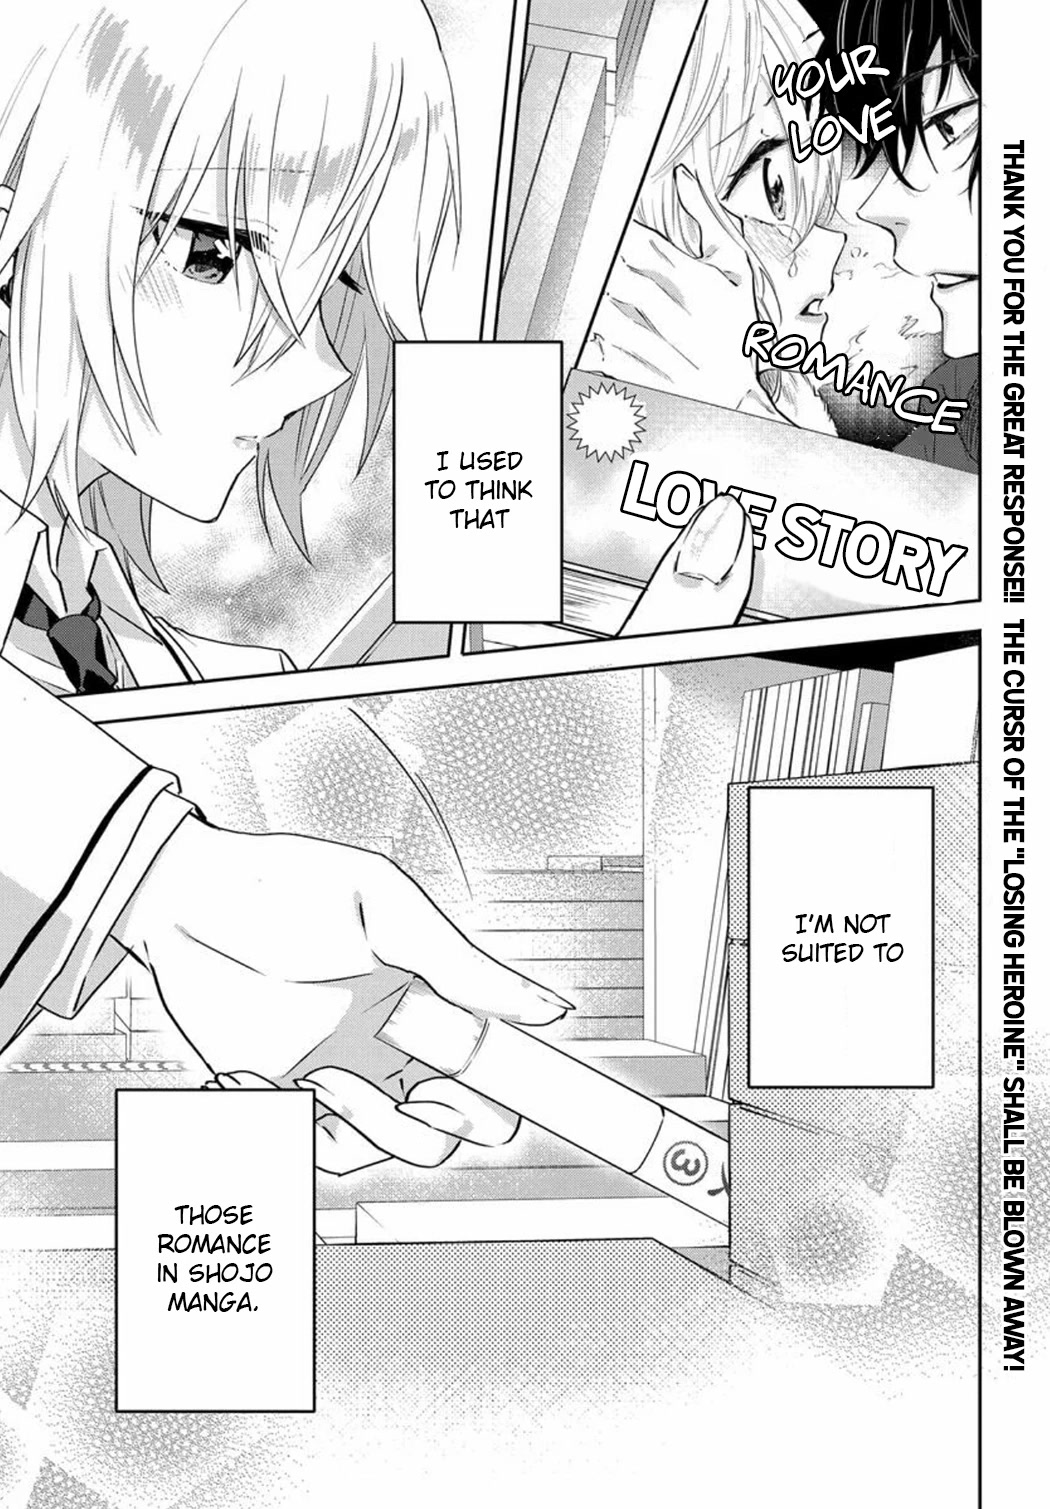 Since I’Ve Entered The World Of Romantic Comedy Manga, I’Ll Do My Best To Make The Losing Heroine Happy - Page 1